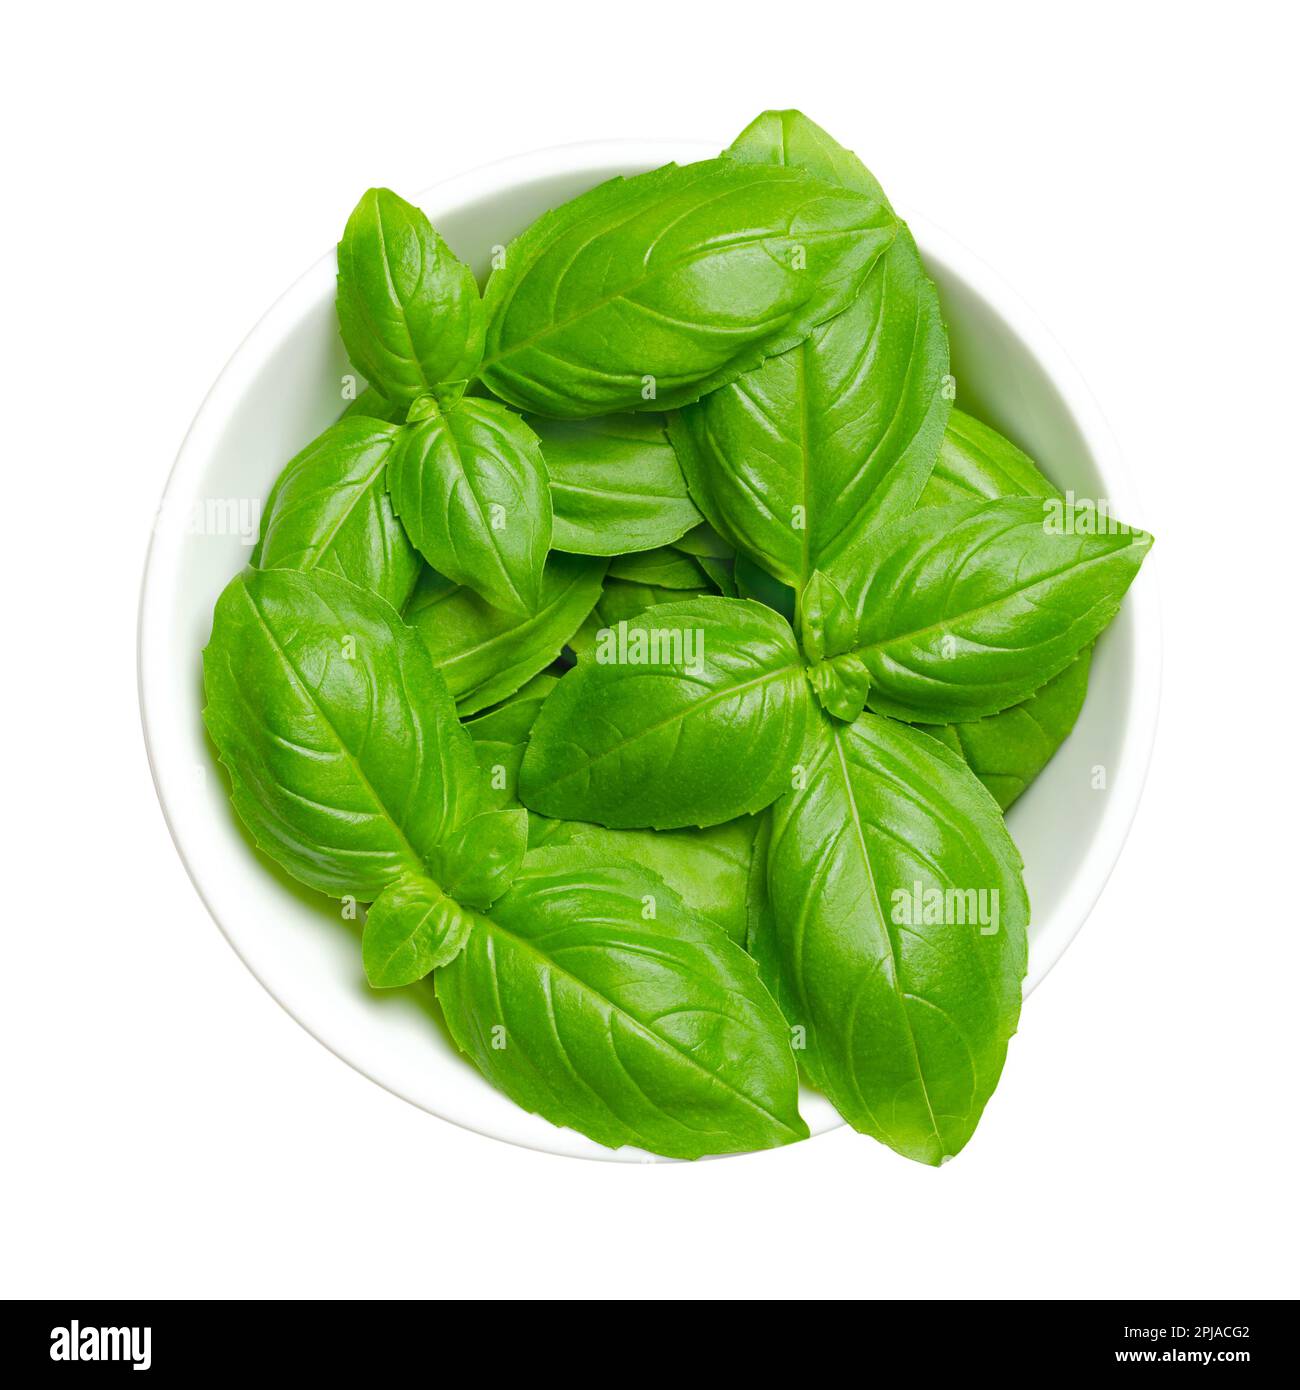 Fresh green sweet basil leaves, in a white bowl. Also known as great basil or Genovese basil, Ocimum basilicum, a culinary herb in the mint family. Stock Photo